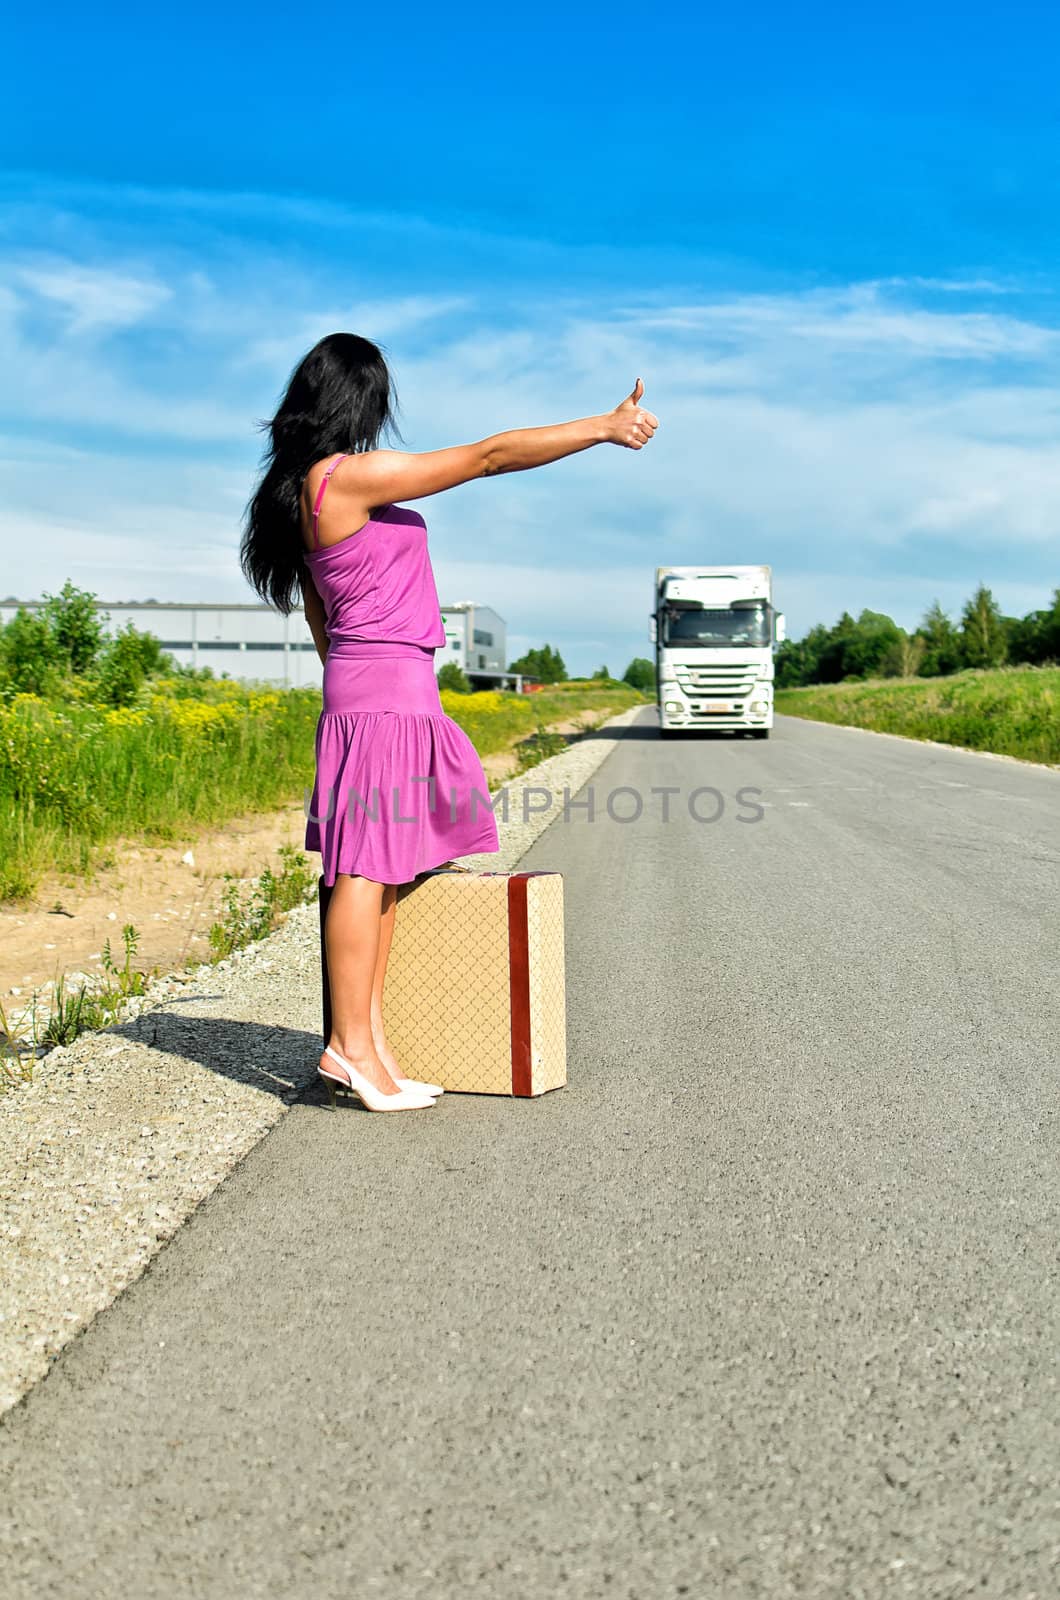 Woman with suitcase hitchhiking a car